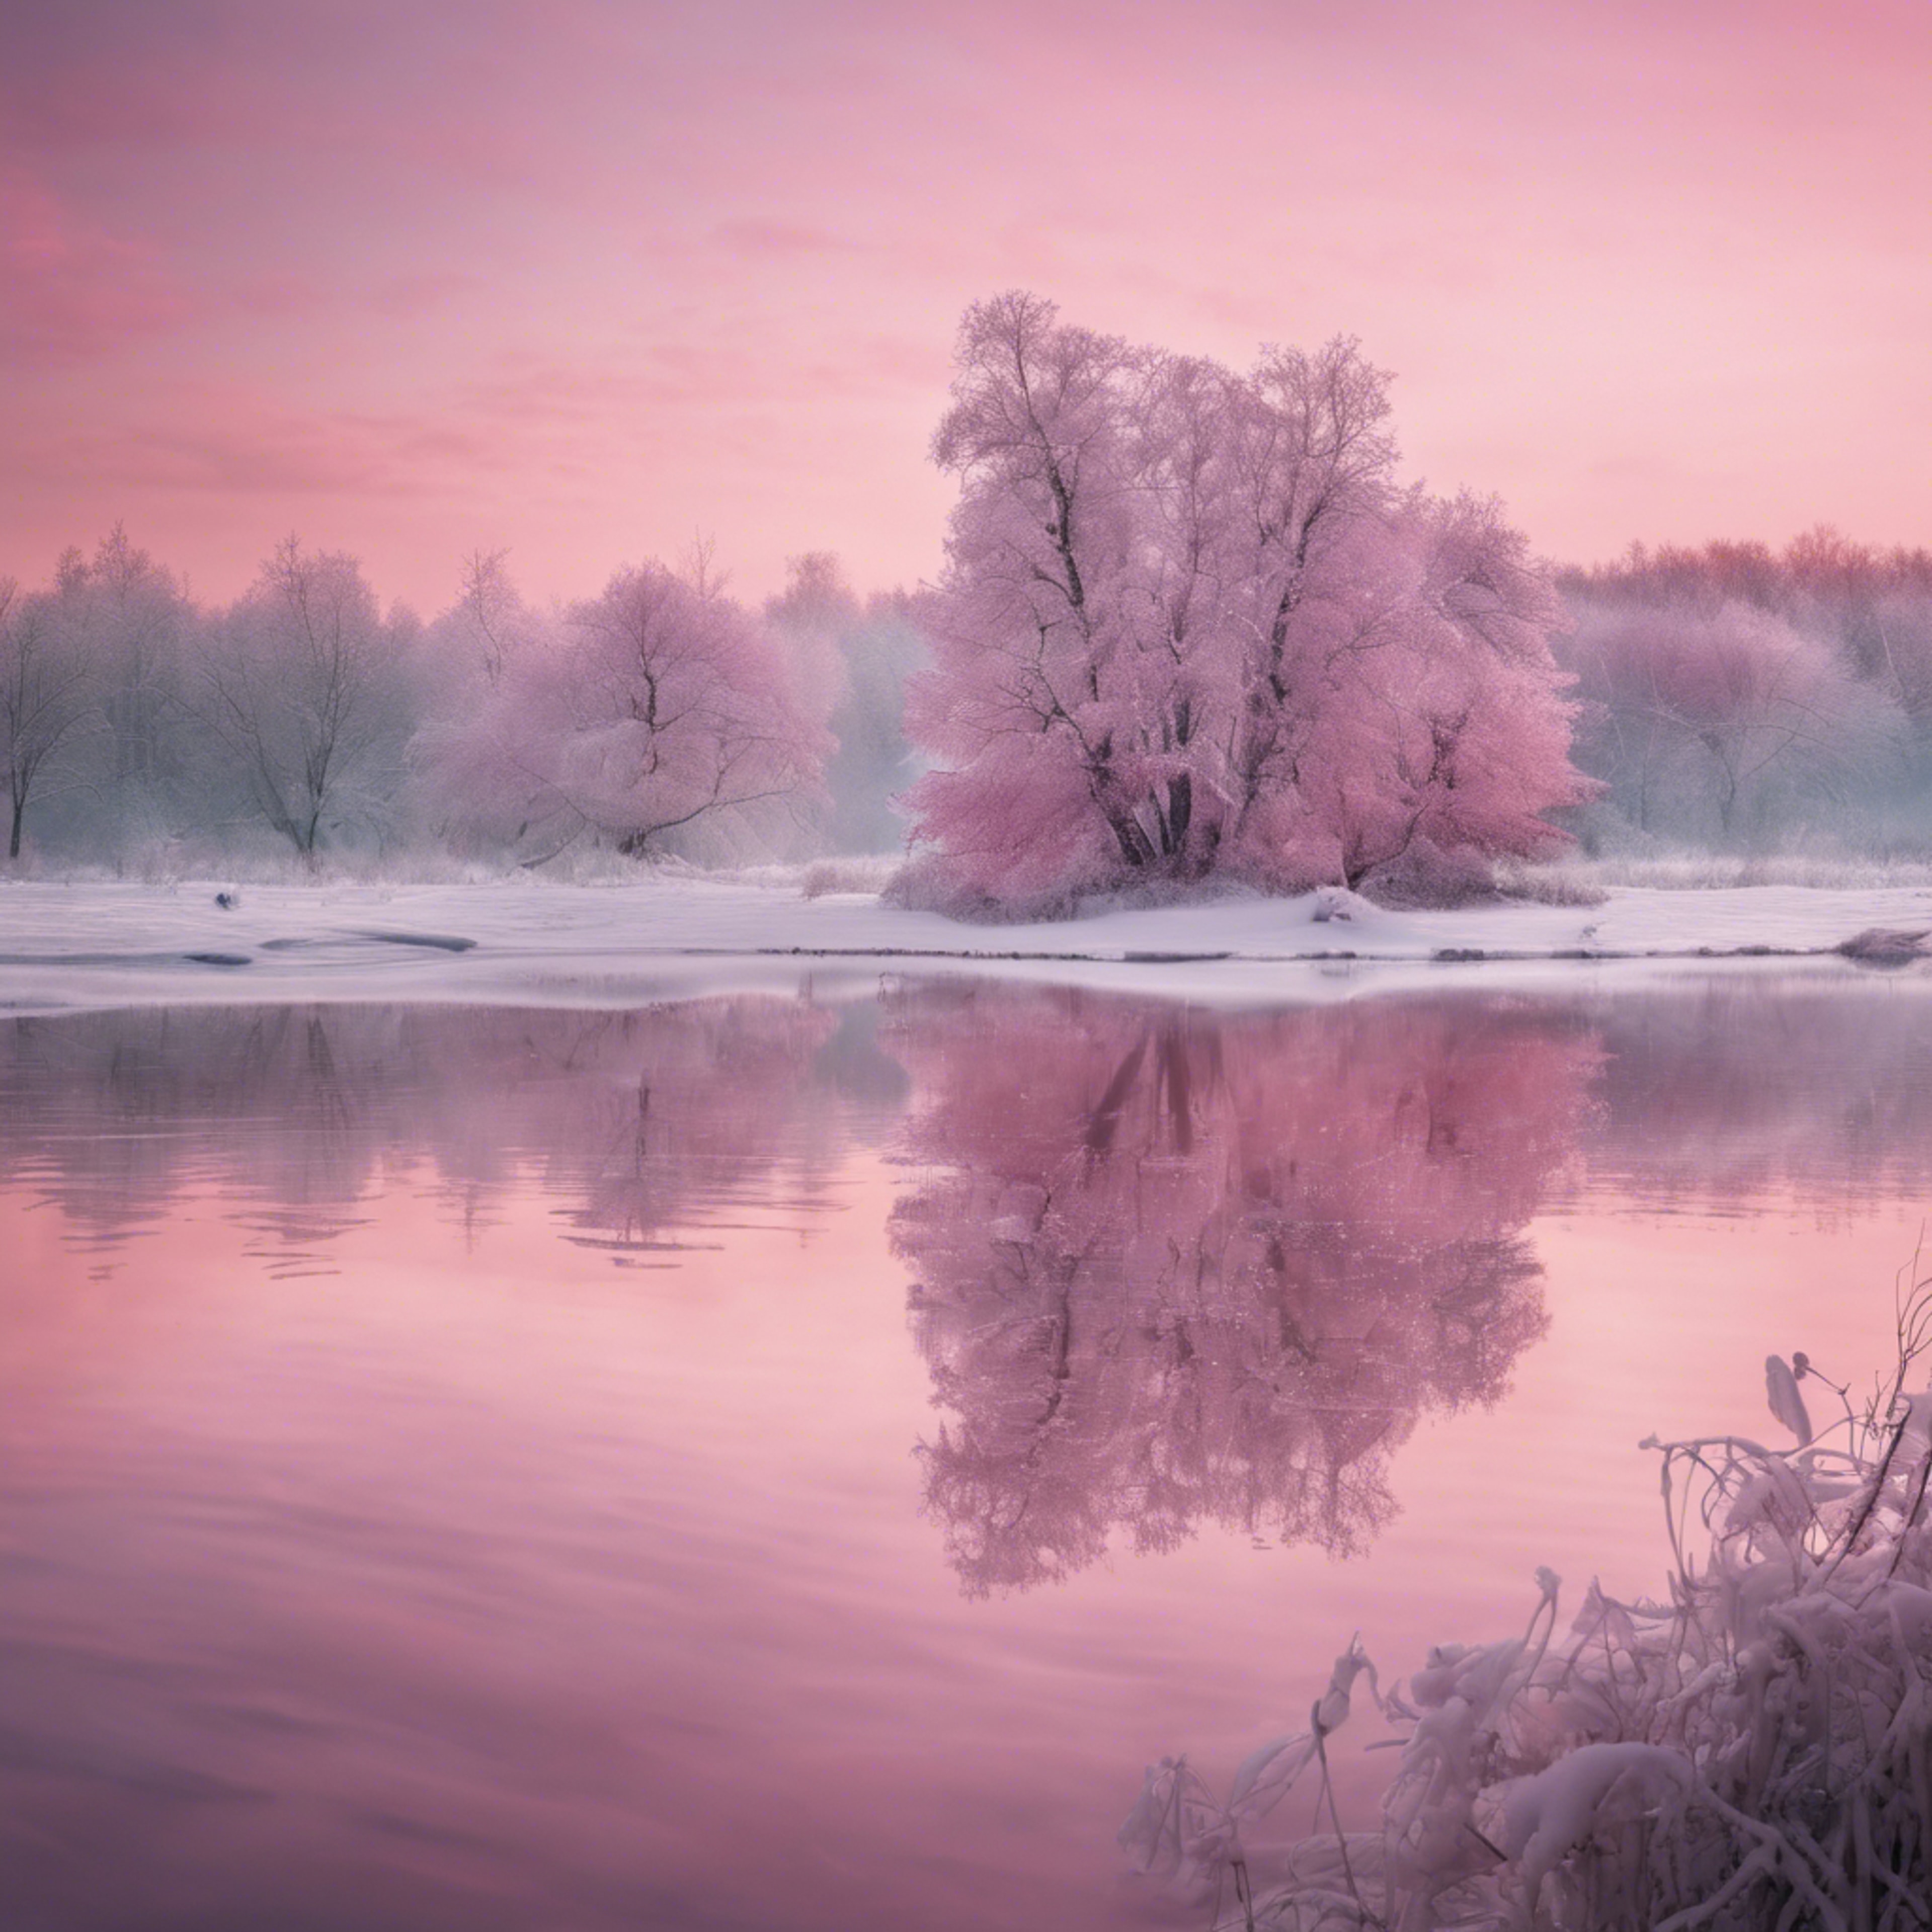 A tranquil pink Christmas morning landscape, reflections on a still frozen lake. Hintergrund[99be3b4566ac4908b7ca]